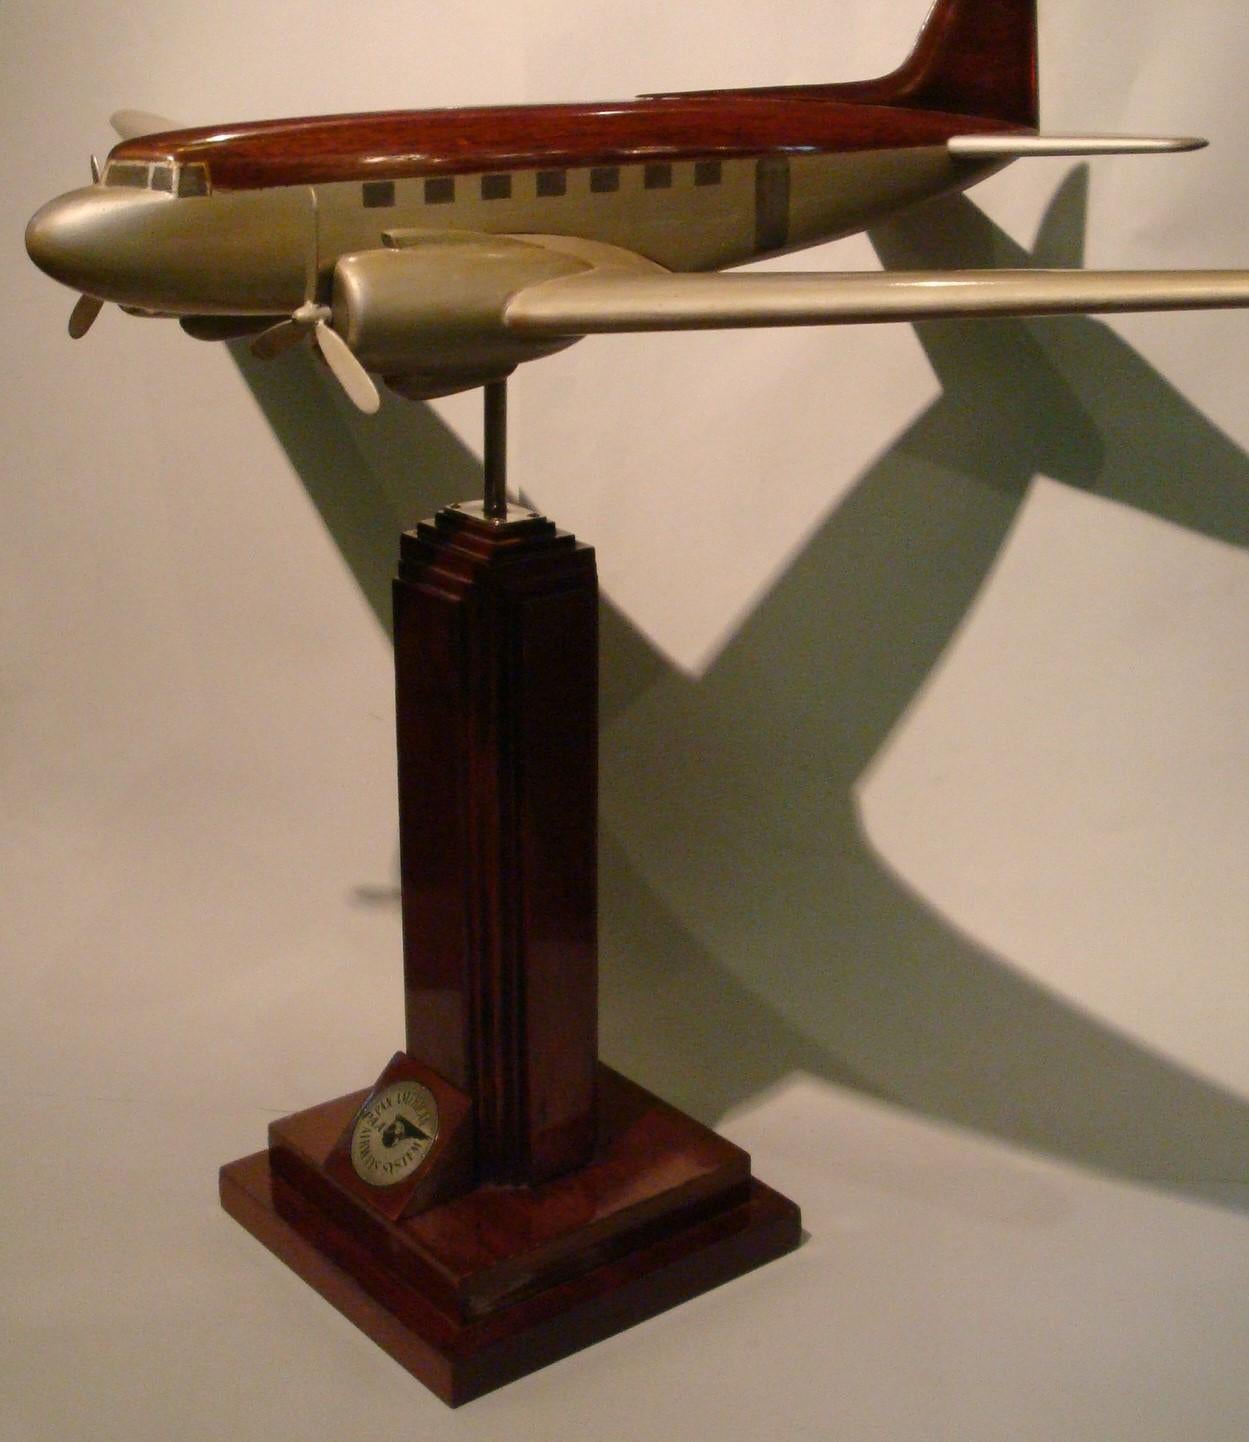 Art Deco / midcentury large DC3 desk aviation model.
Pan-Am wooden airplane model.
It was in an office of the company in South America.
Very good restored conditions. Slight age wear.

History
Pan American Airways began the first transatlantic